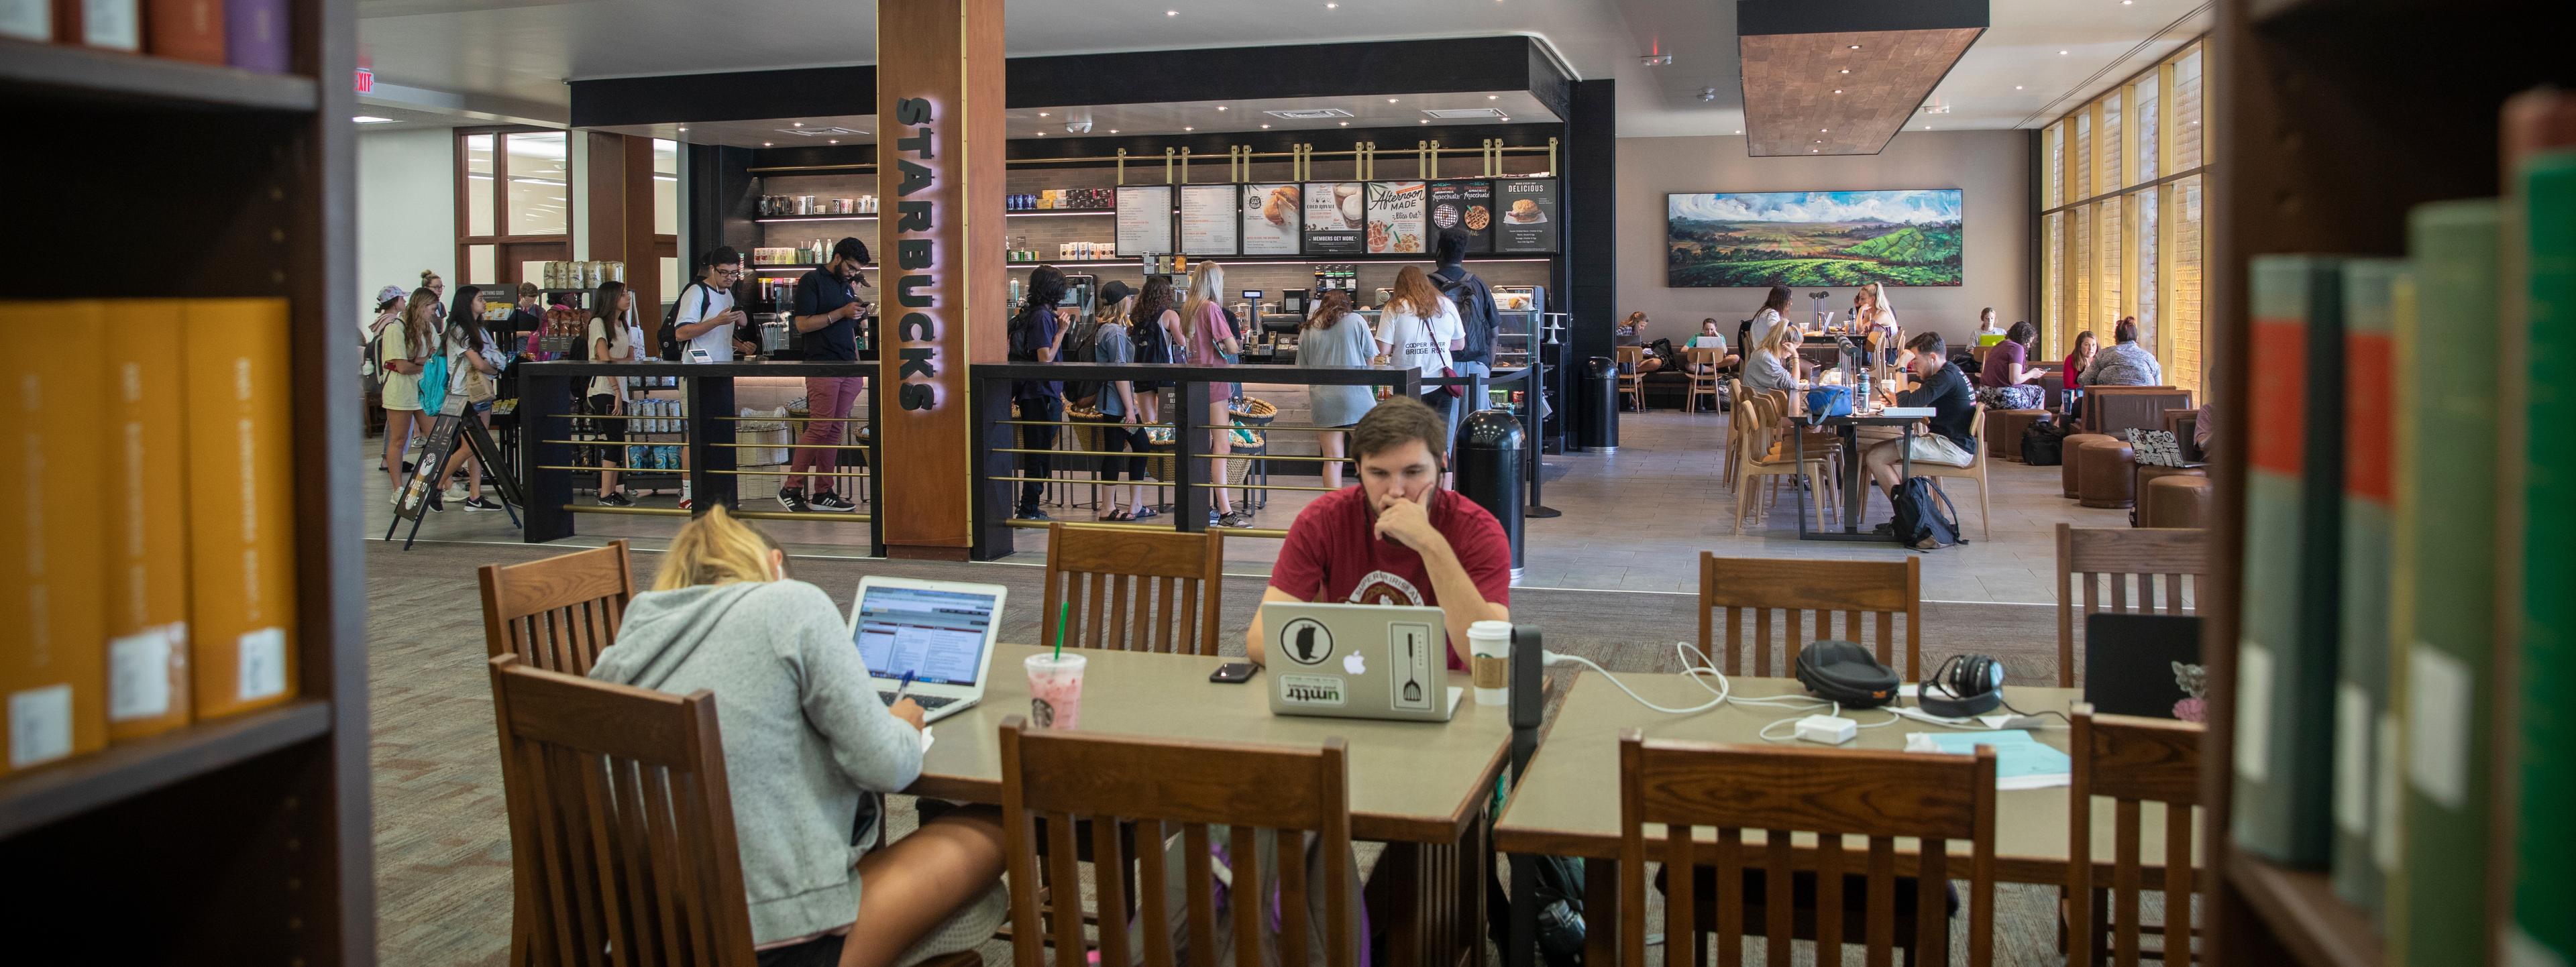 Students studying and lining up at USC Starbucks library.